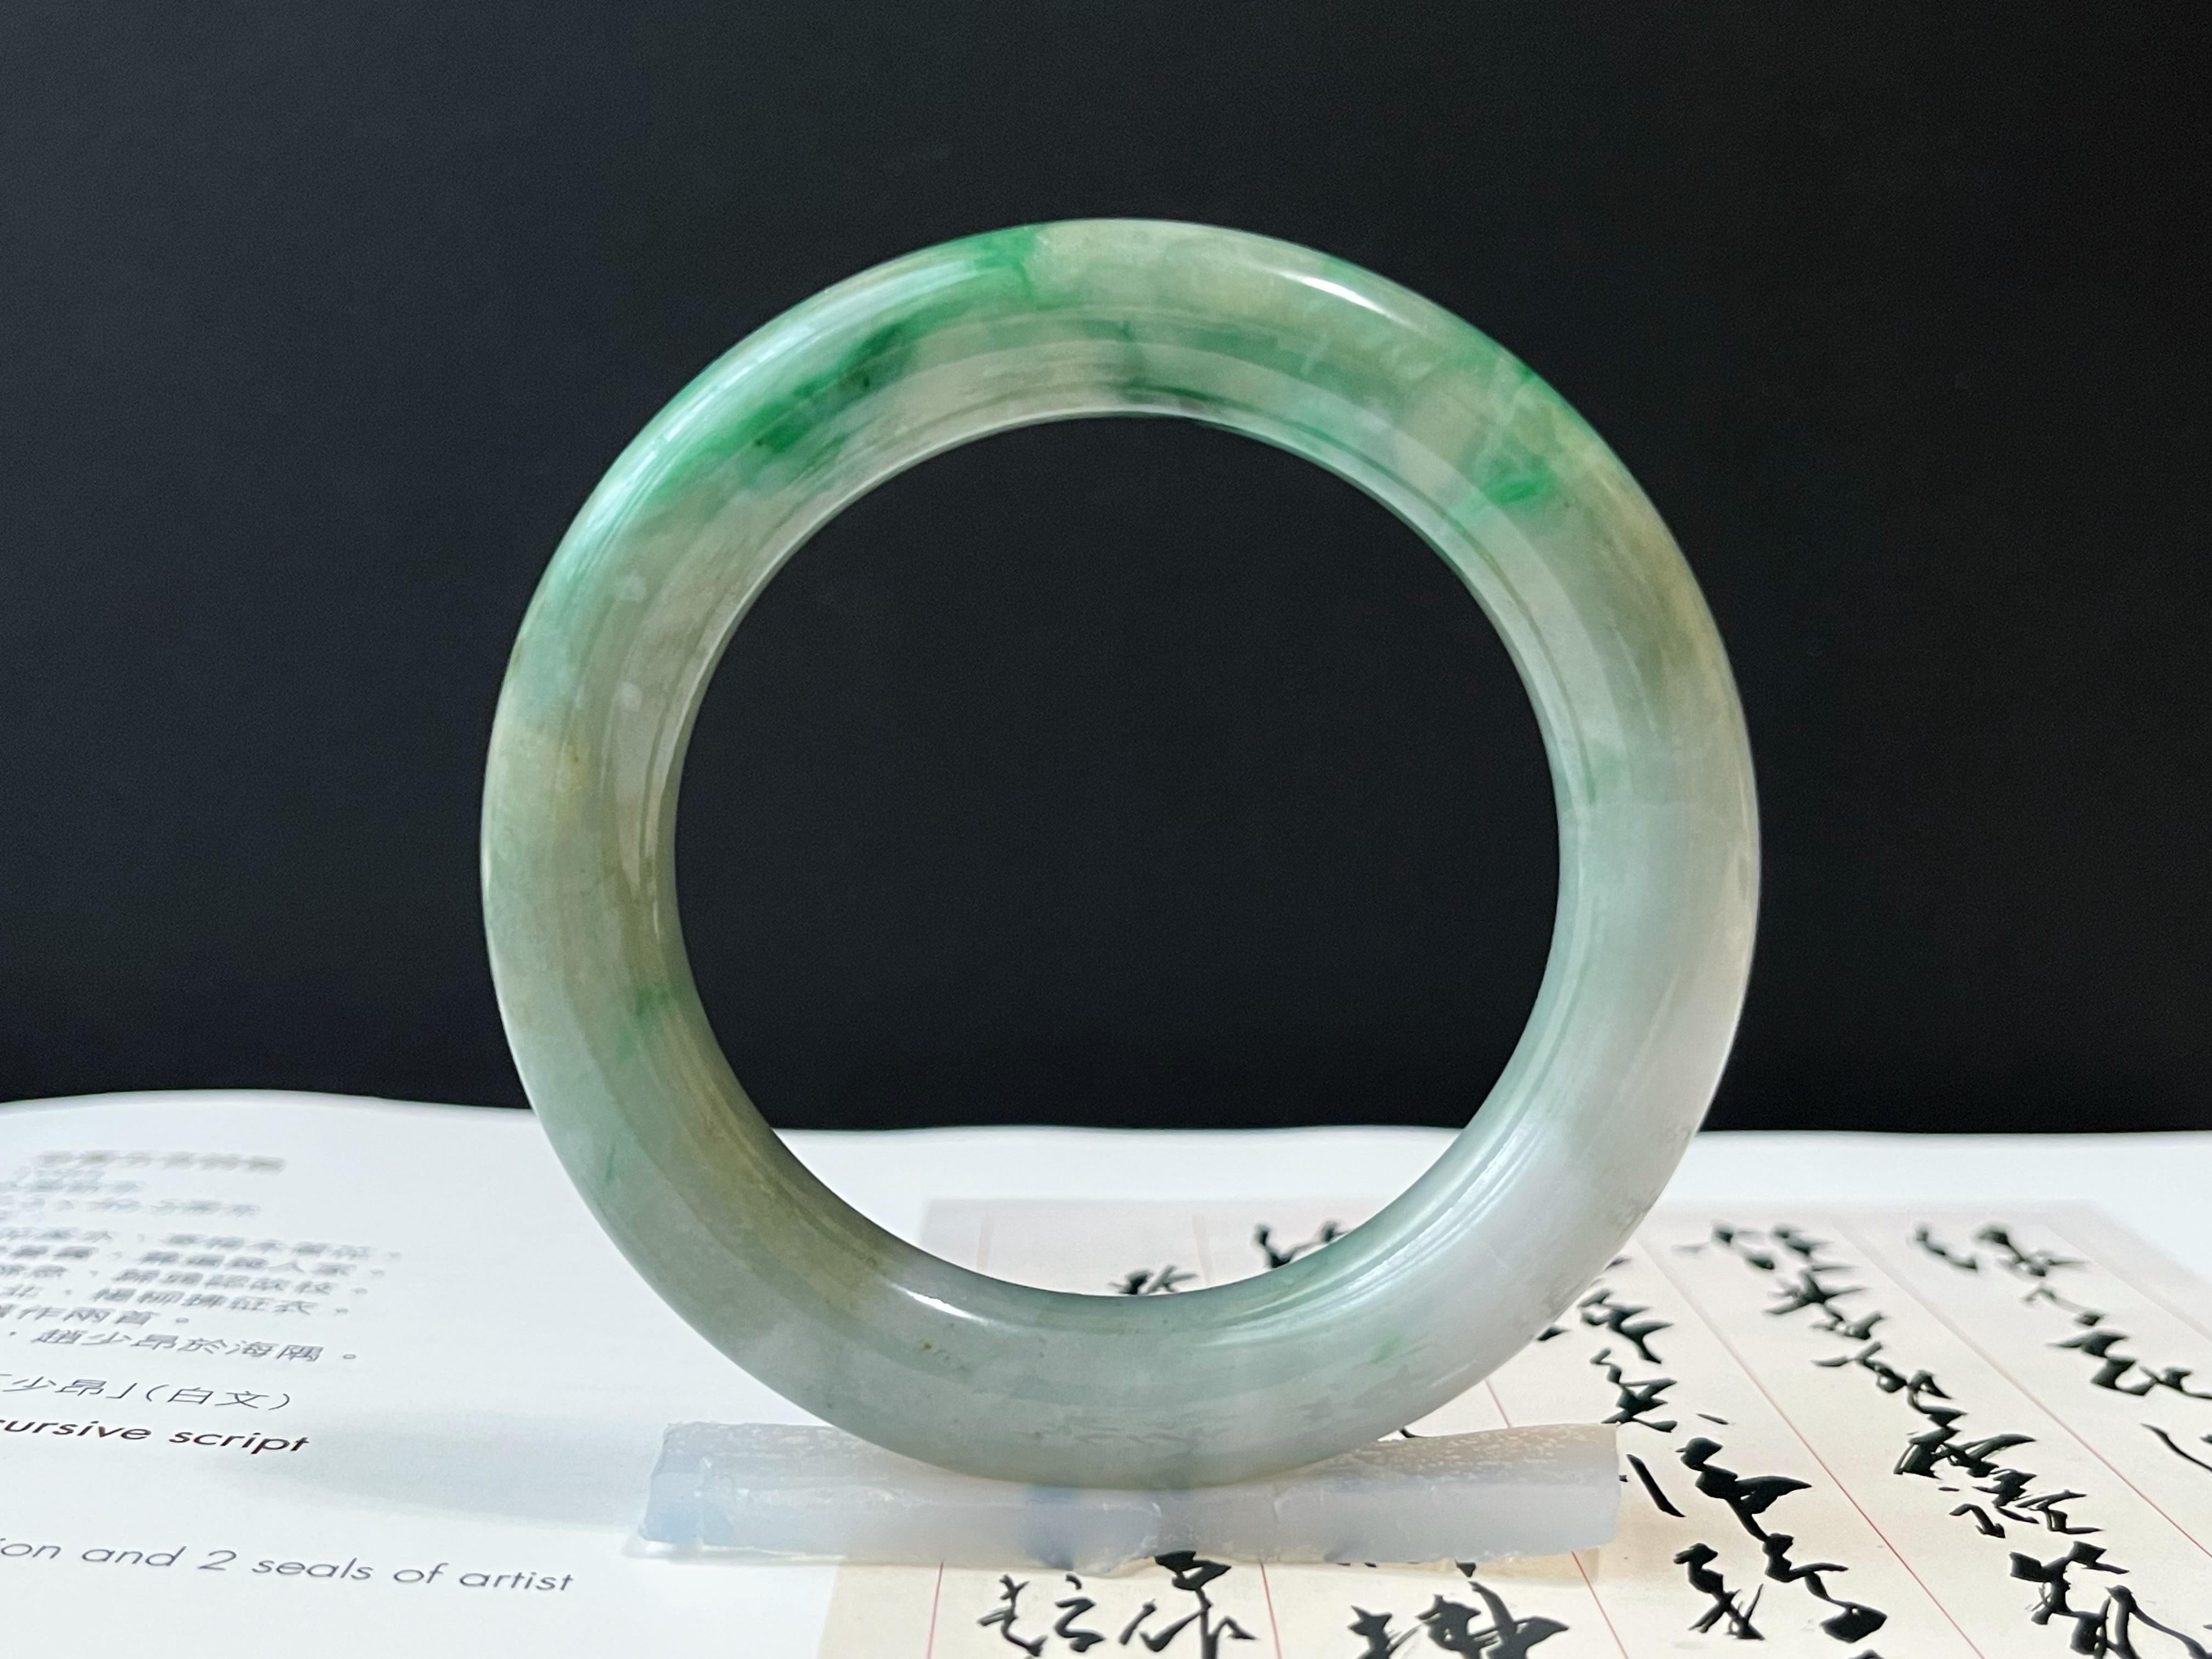 This stunning, premium Myanmar jade bangle is 100% natural, untreated, and undyed Grade-A jadeite. The stunning green floral pattern Mother Nature gifted makes this bracelet unique and attractive. 
 
The jadeite bangle/ bracelet is known as the